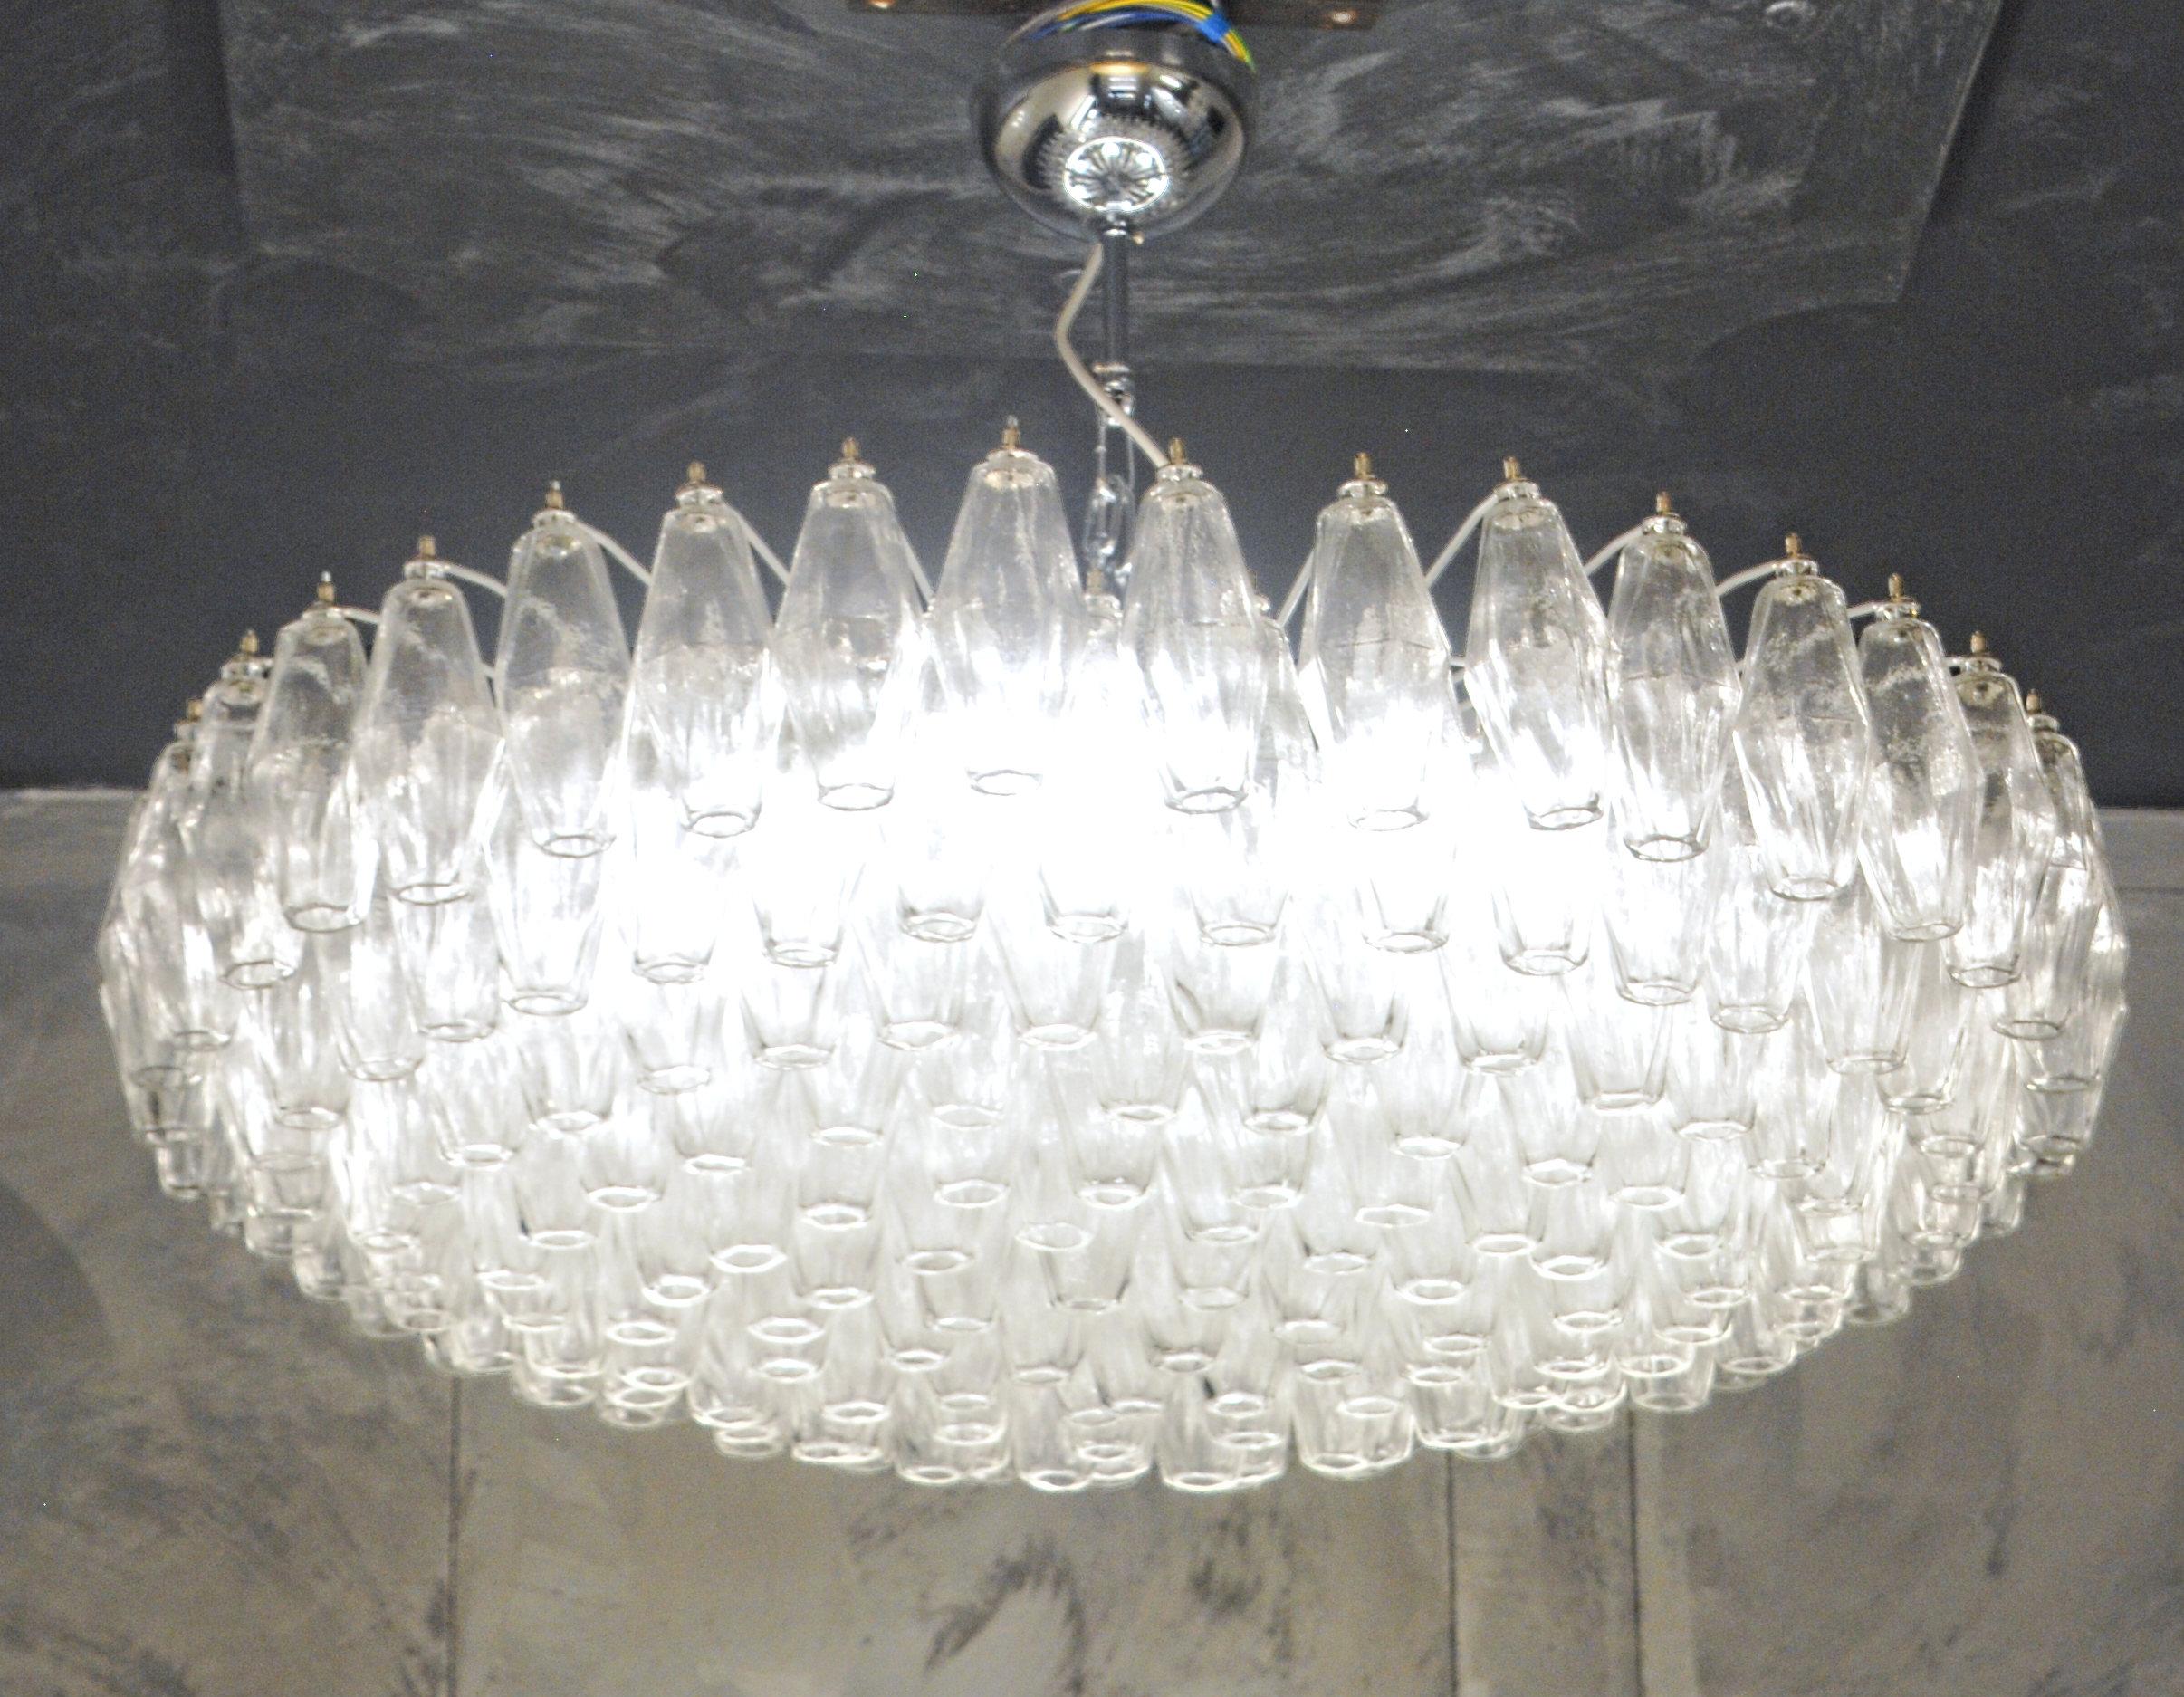 Sumptuous exemplary midcentury chandelier. For large a large hall, ballroom or public spaces. Would be stunning in a large midcentury living room or an eclectic home. This triedri chandelier is only in clear crystal glass, the two color combination